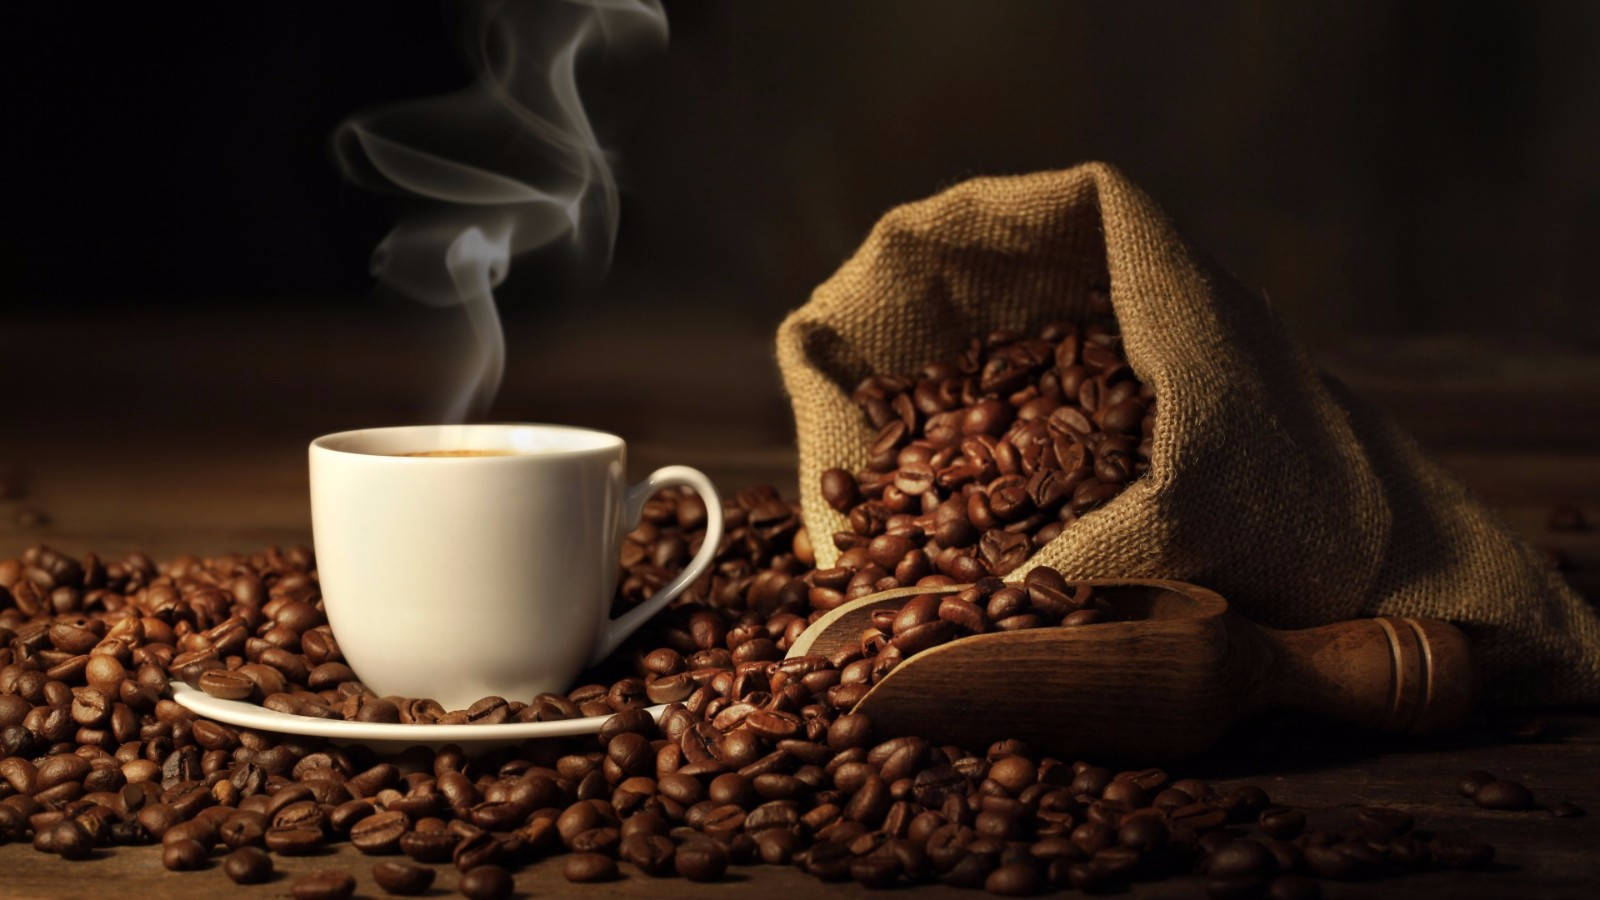 Sheesh Scent Of Coffee Beans Wallpaper